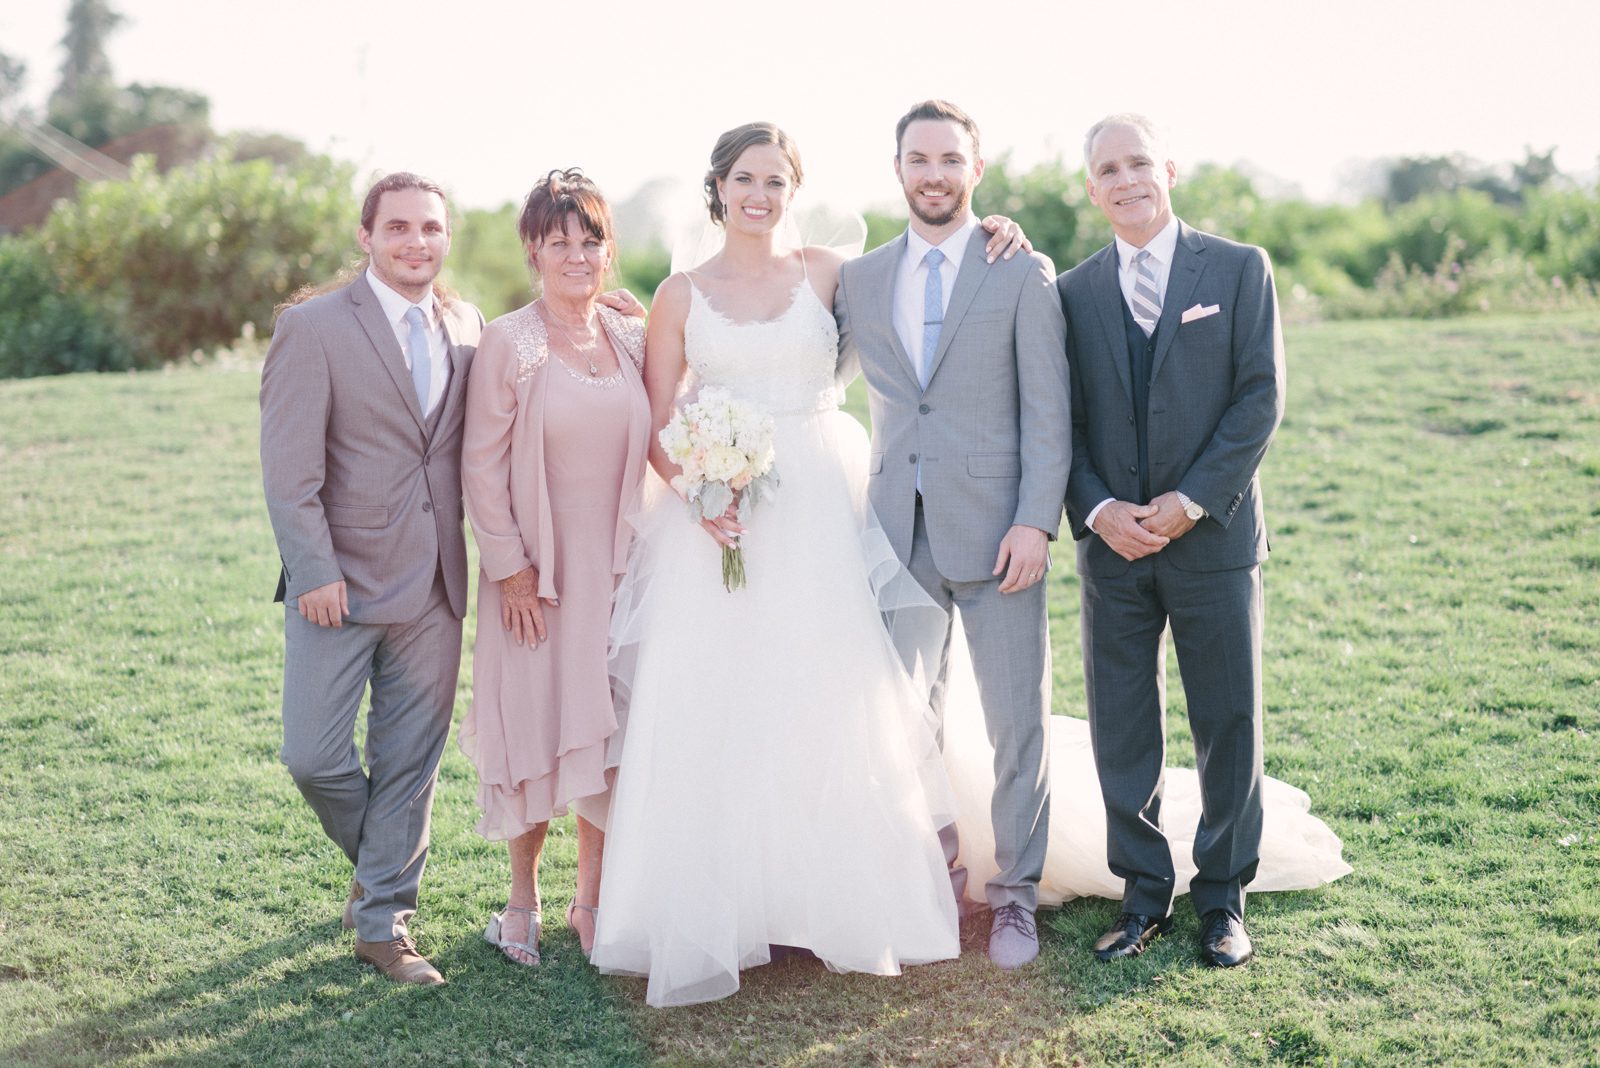 Family photos at Limoneira Ranch Wedding by Paso Robles Wedding Photographer Yvonne Goll Photography